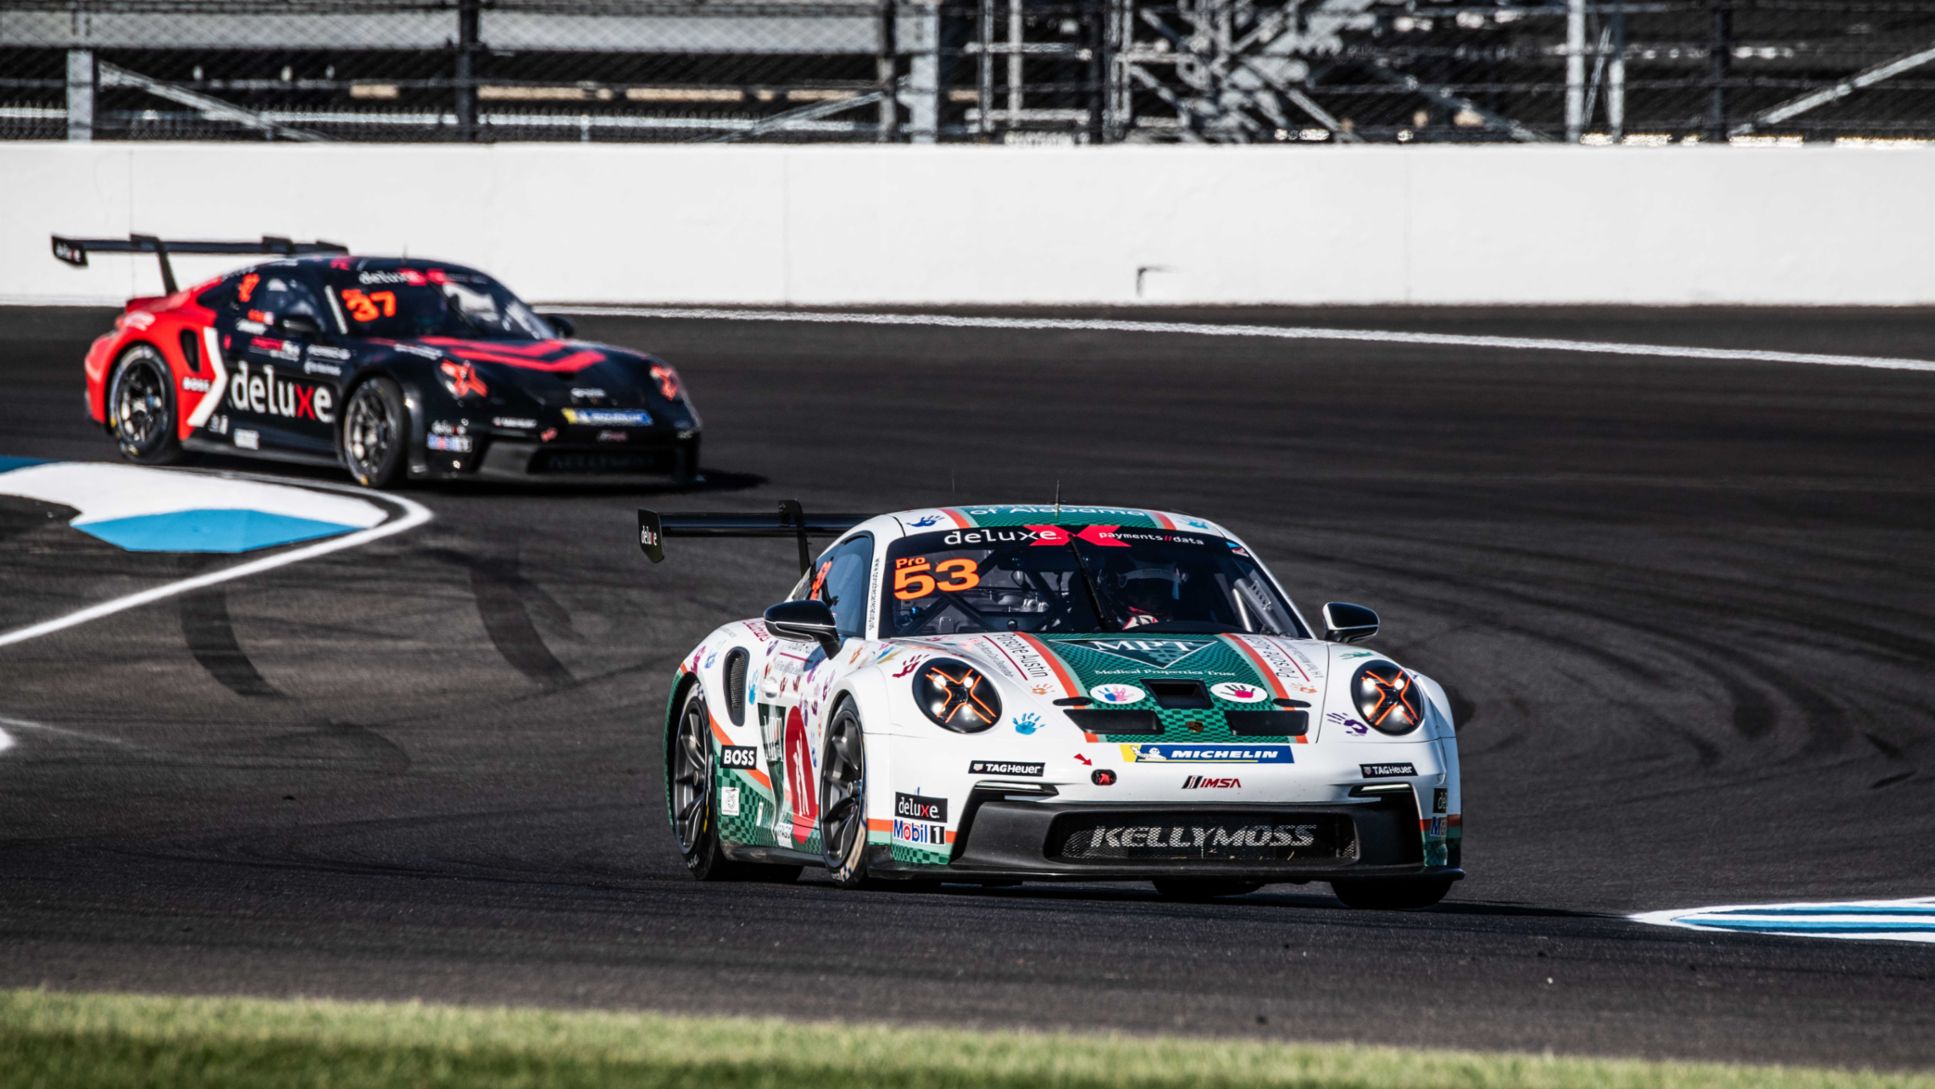 https://newsroom.porsche.com/.imaging/mte/porsche-templating-theme/image_1290x726/dam/US-local/Press-Releases/2023/Rennsport_Carrera_Cup_Preview_Notes/Riley-Dickinson-swept-the-Indianapolis-Porsche-Carrera-Cup-North-America-weekend-to-win-the-Pro-class-championship.jpg/jcr:content/Riley%20Dickinson%20swept%20the%20Indianapolis%20Porsche%20Carrera%20Cup%20North%20America%20weekend%20to%20win%20the%20Pro%20class%20championship.jpg